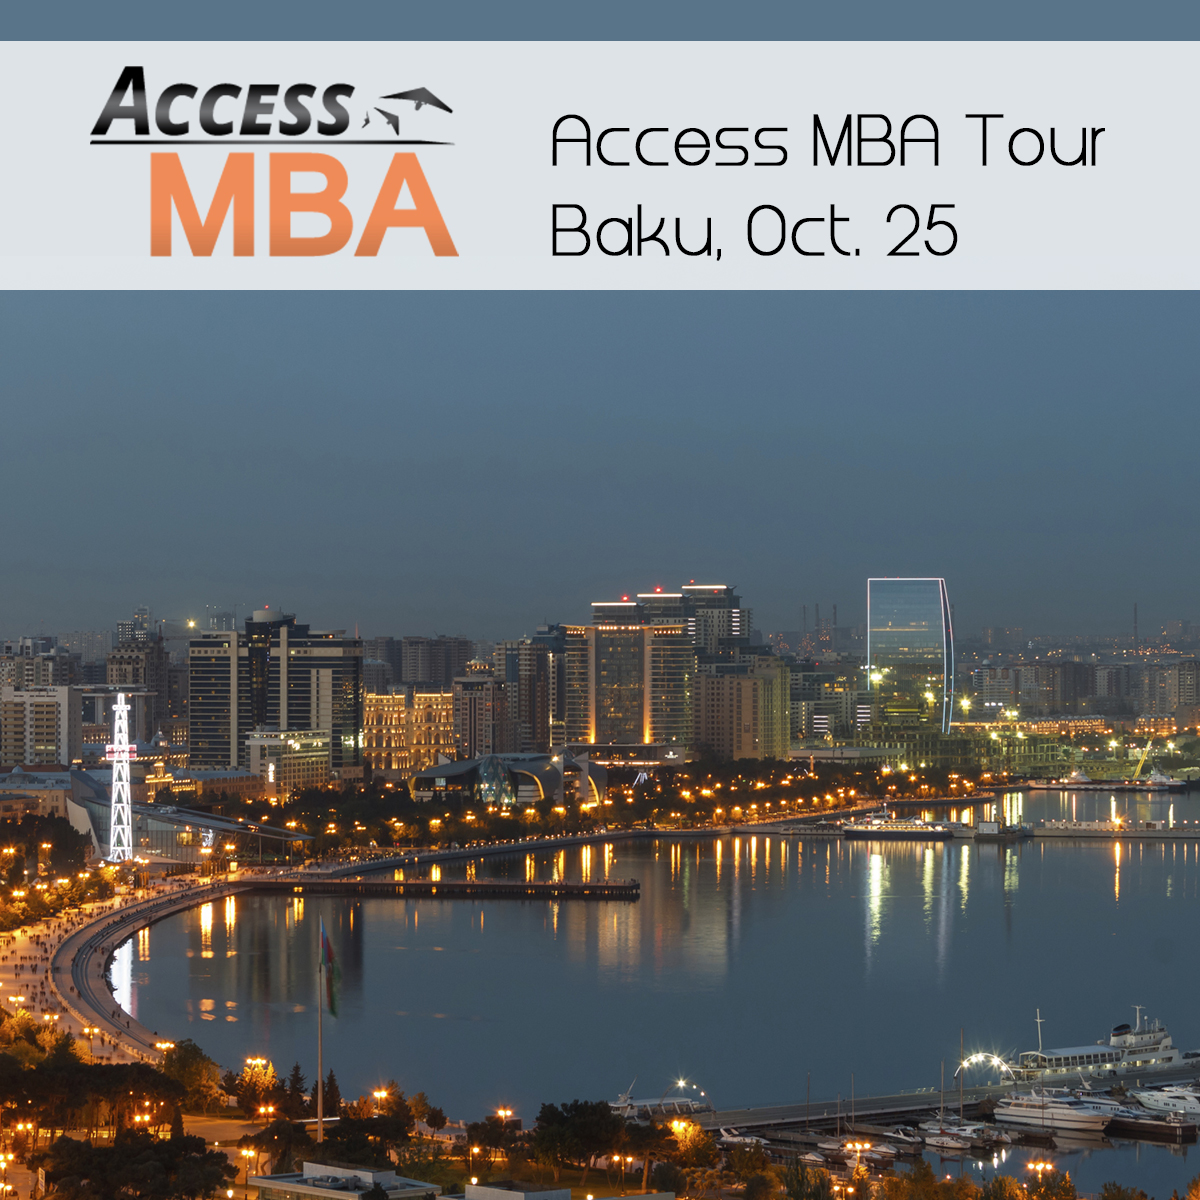 Access MBA tour to welcome business professionals in Baku